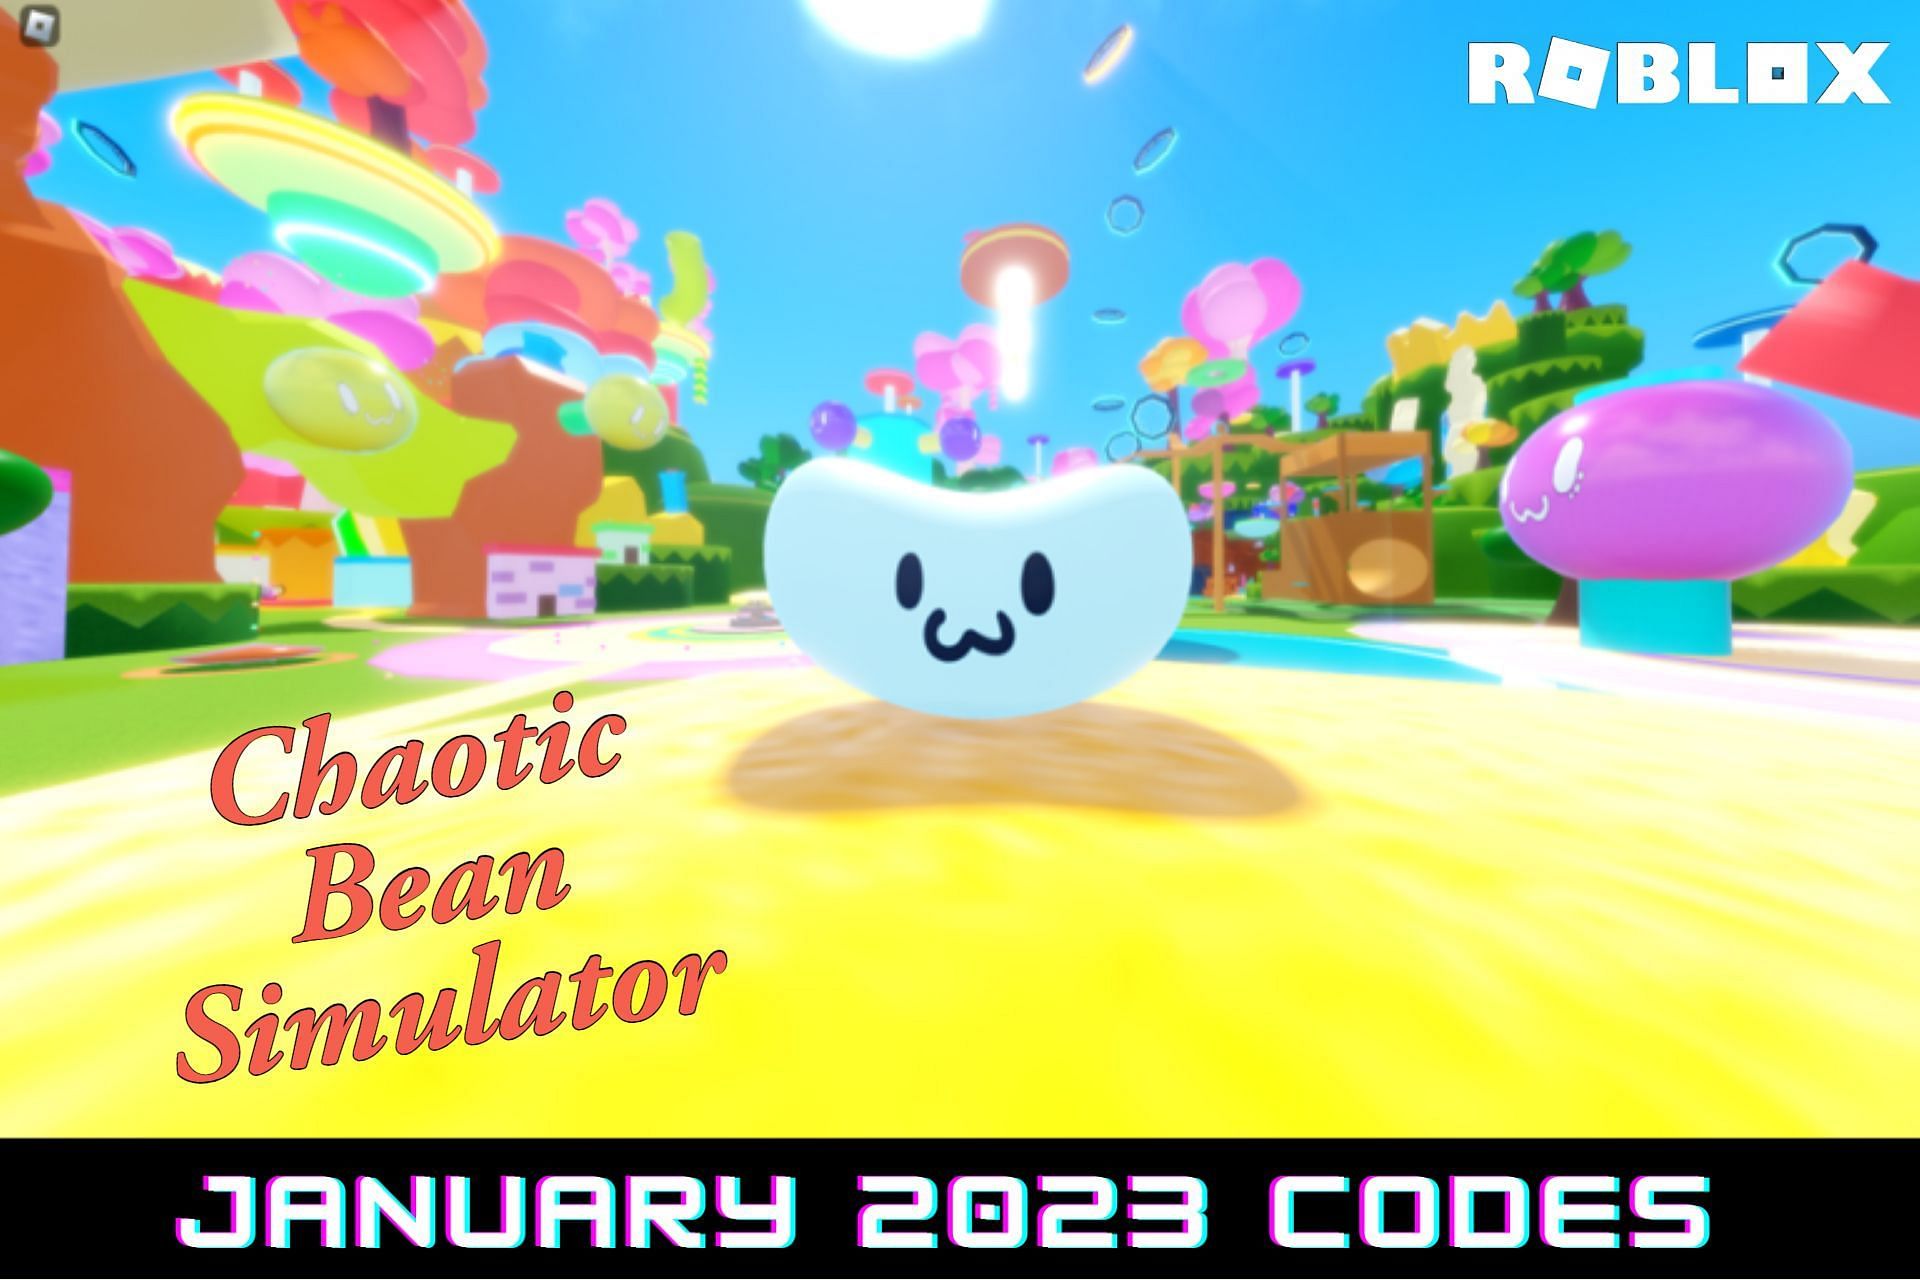 roblox-chaotic-bean-simulator-codes-for-january-2023-free-outfits-and-titles